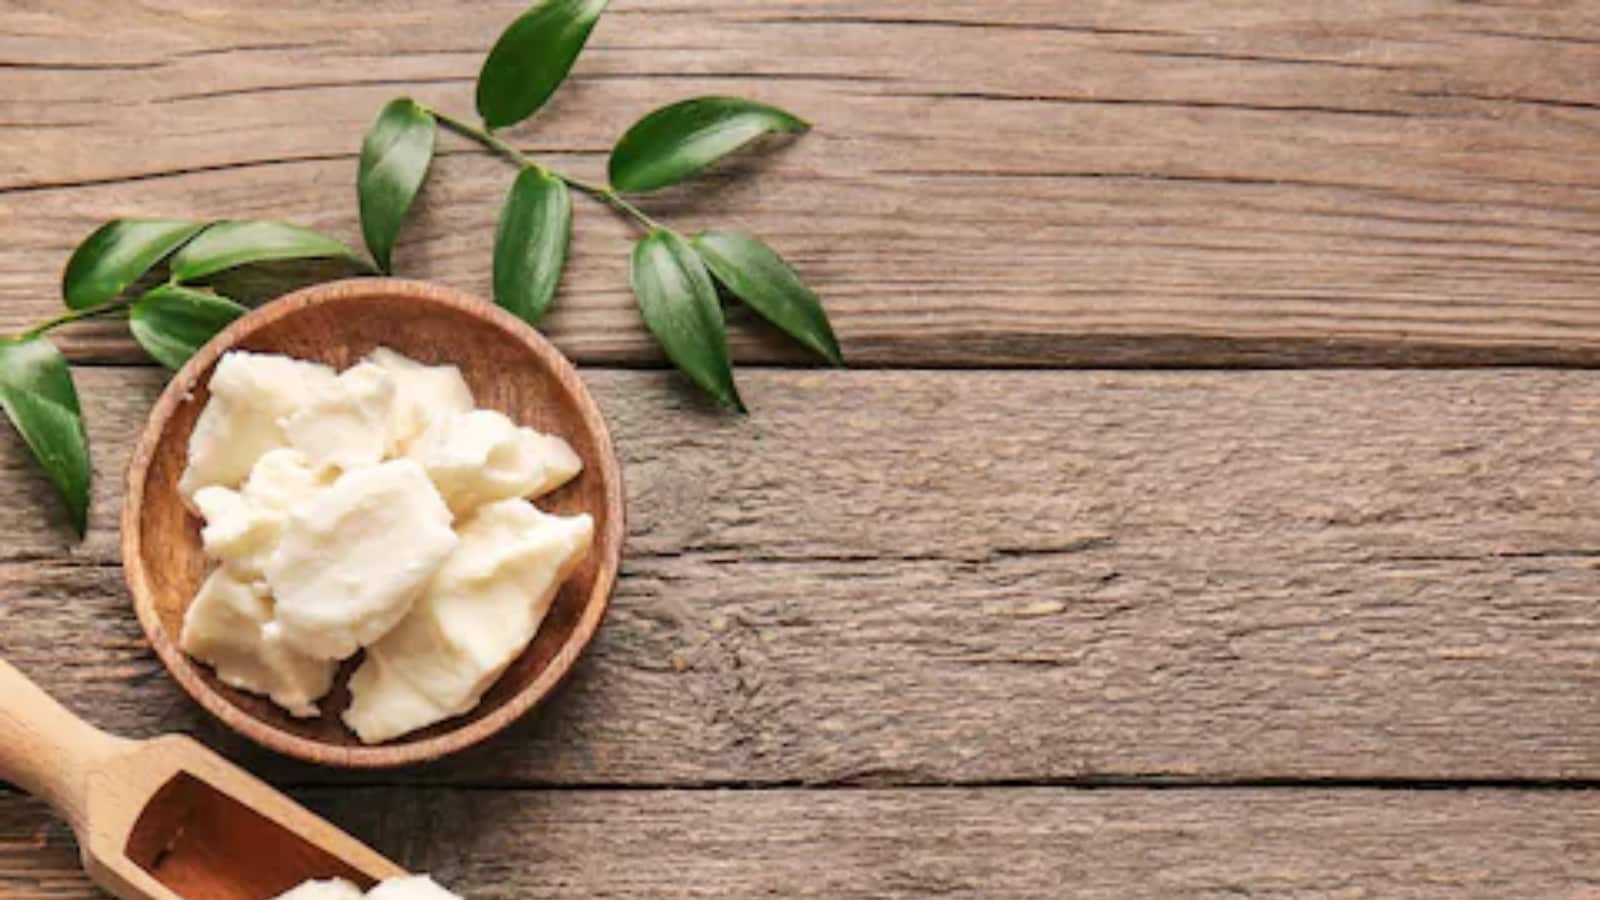 olive-oil-or-shea-butter-know-what-s-best-for-your-skin